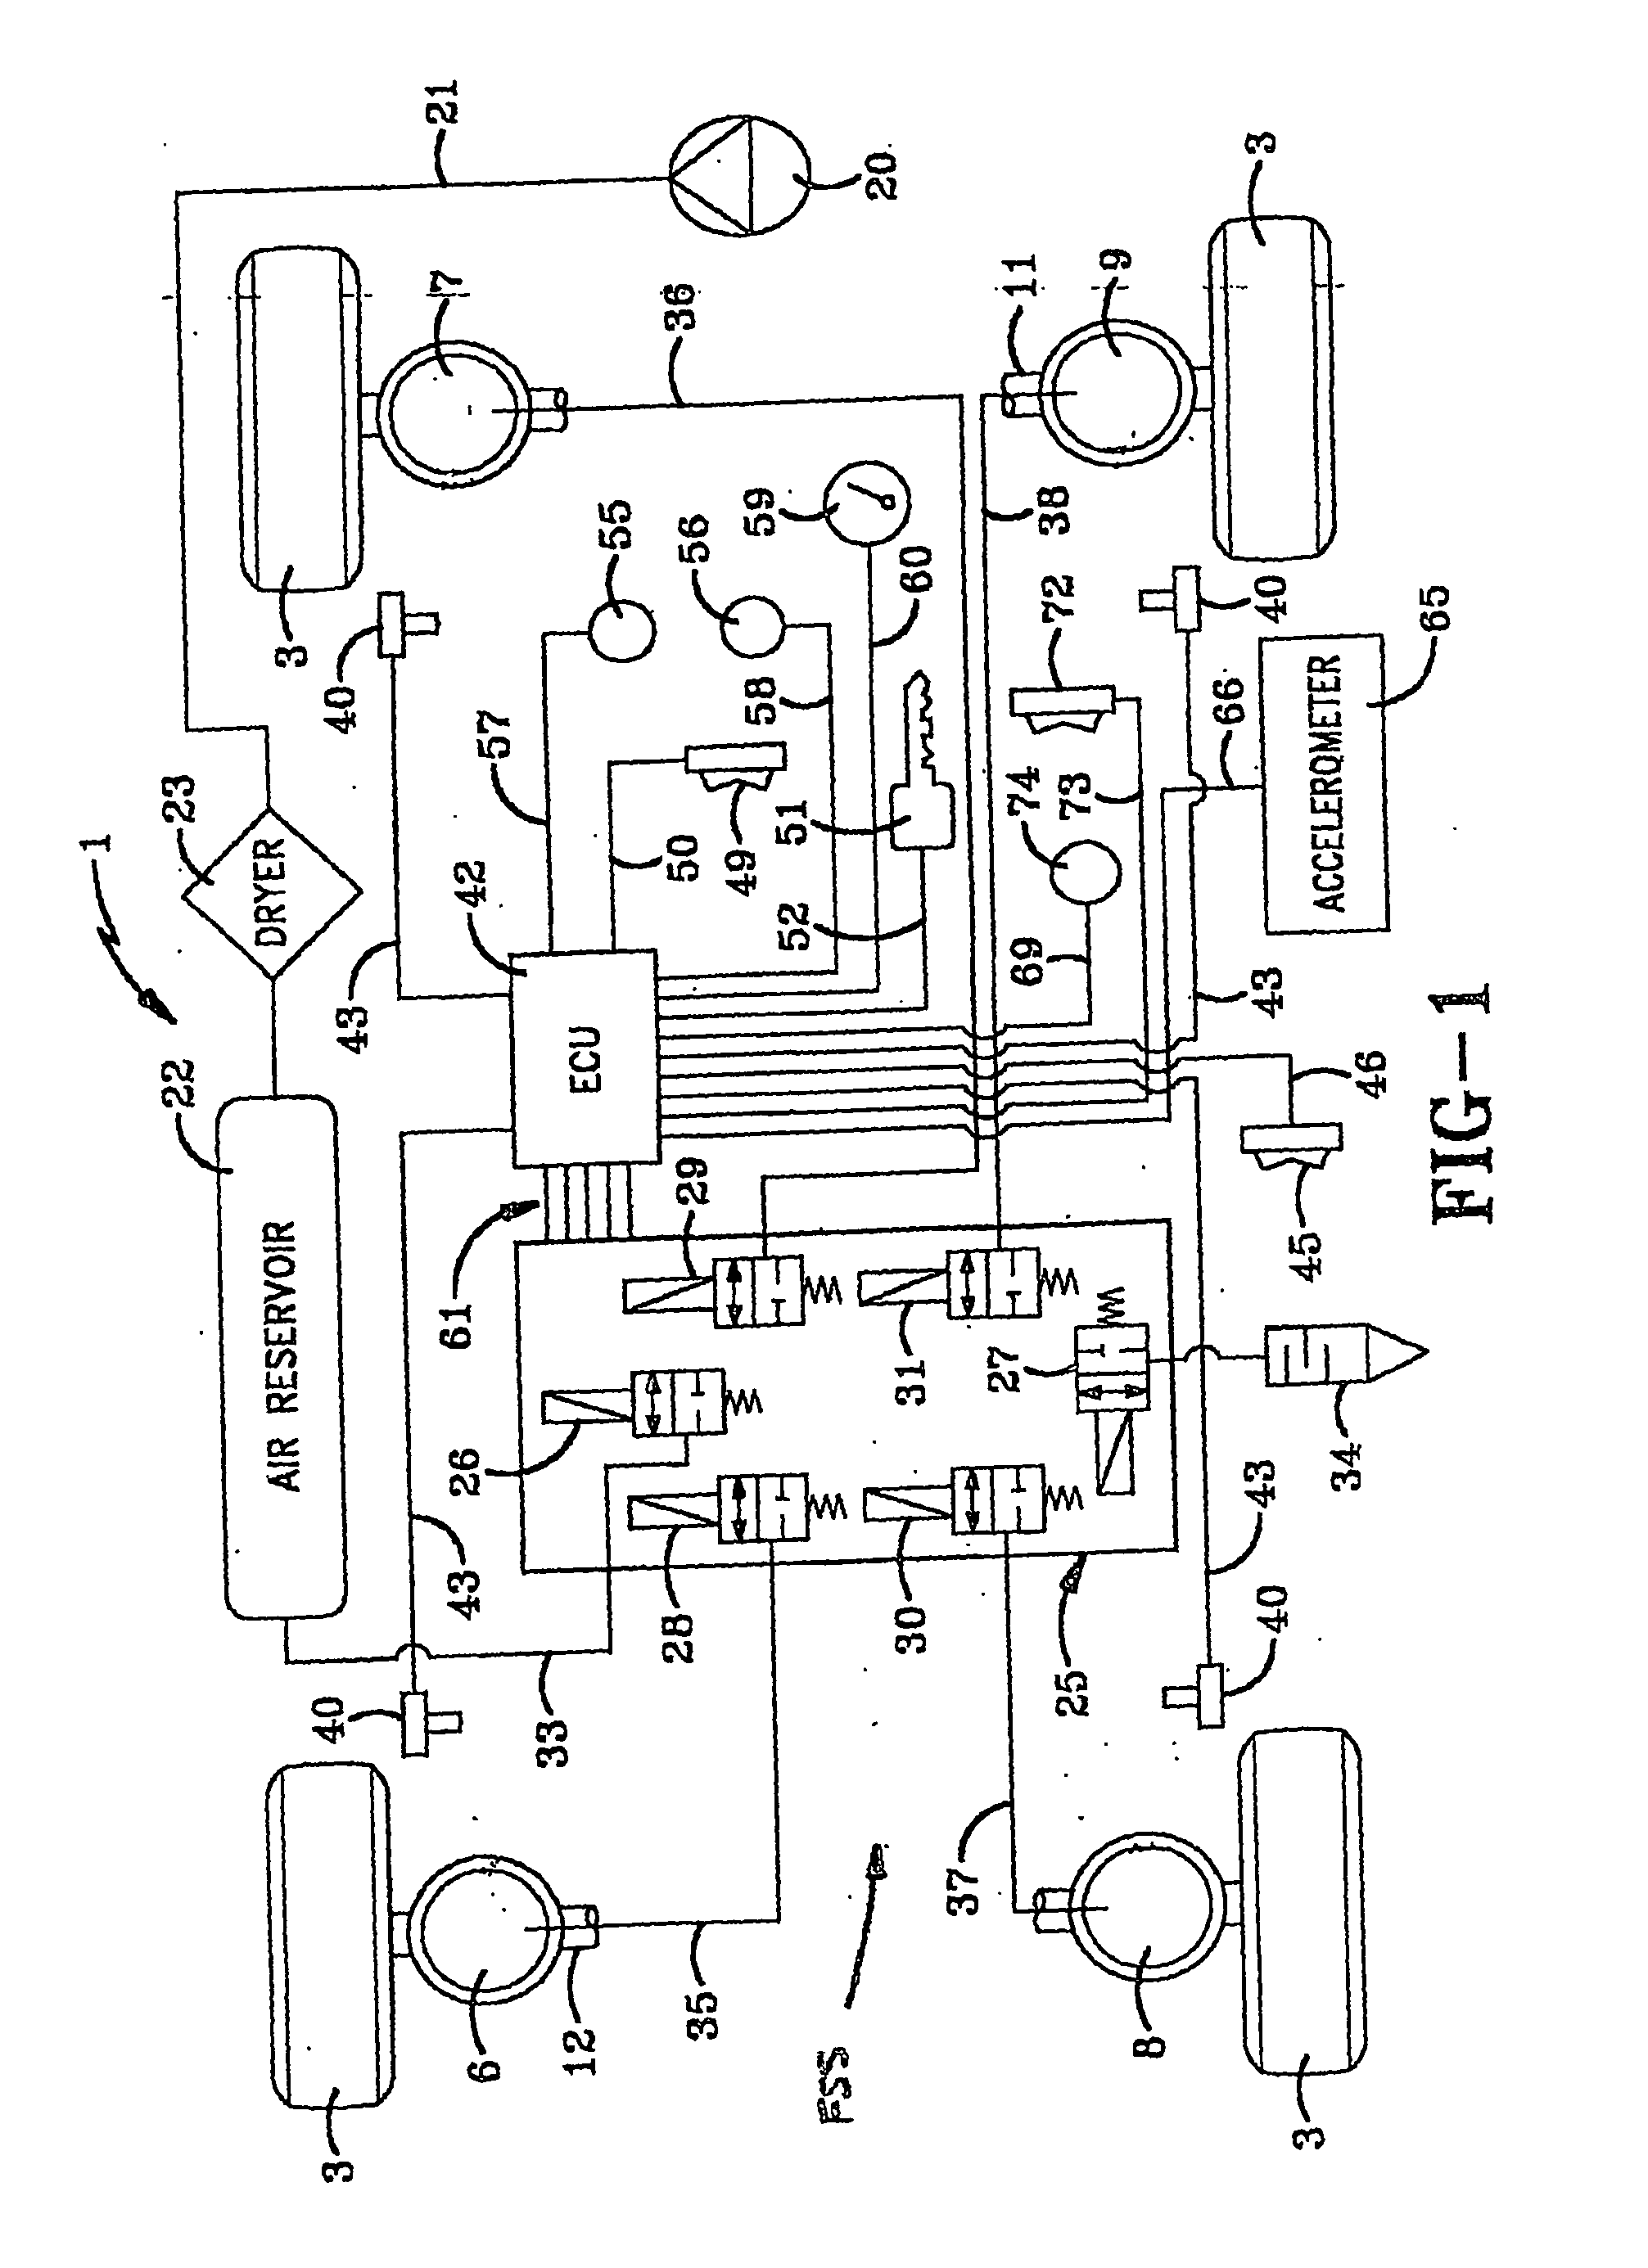 Method and system for aligning a stationary vehicle with an artificial horizon